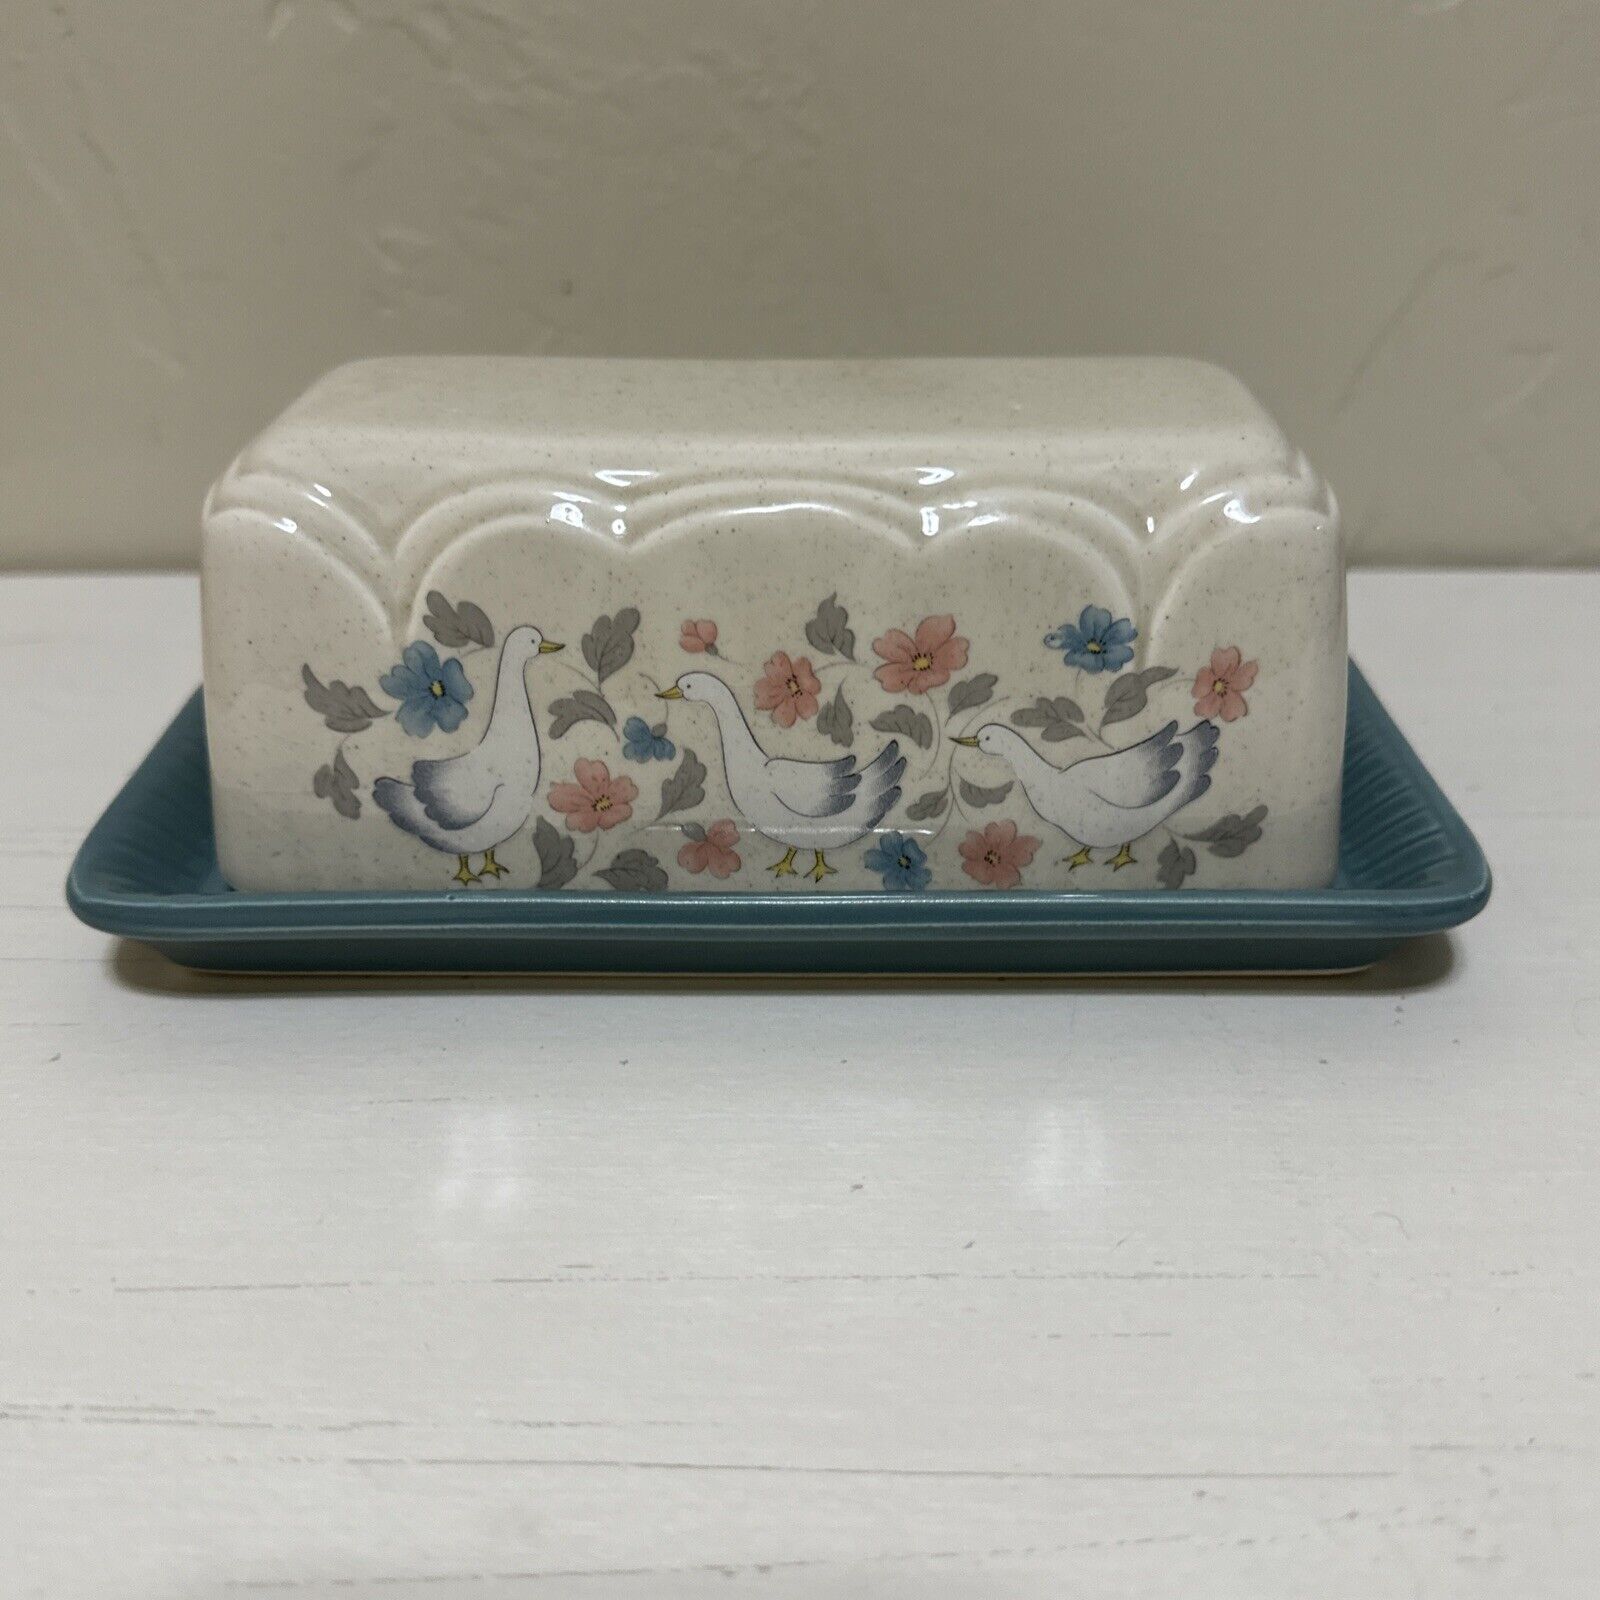 Vintage Country Classics Covered Butter Dish Duck Goose made in Japan stoneware